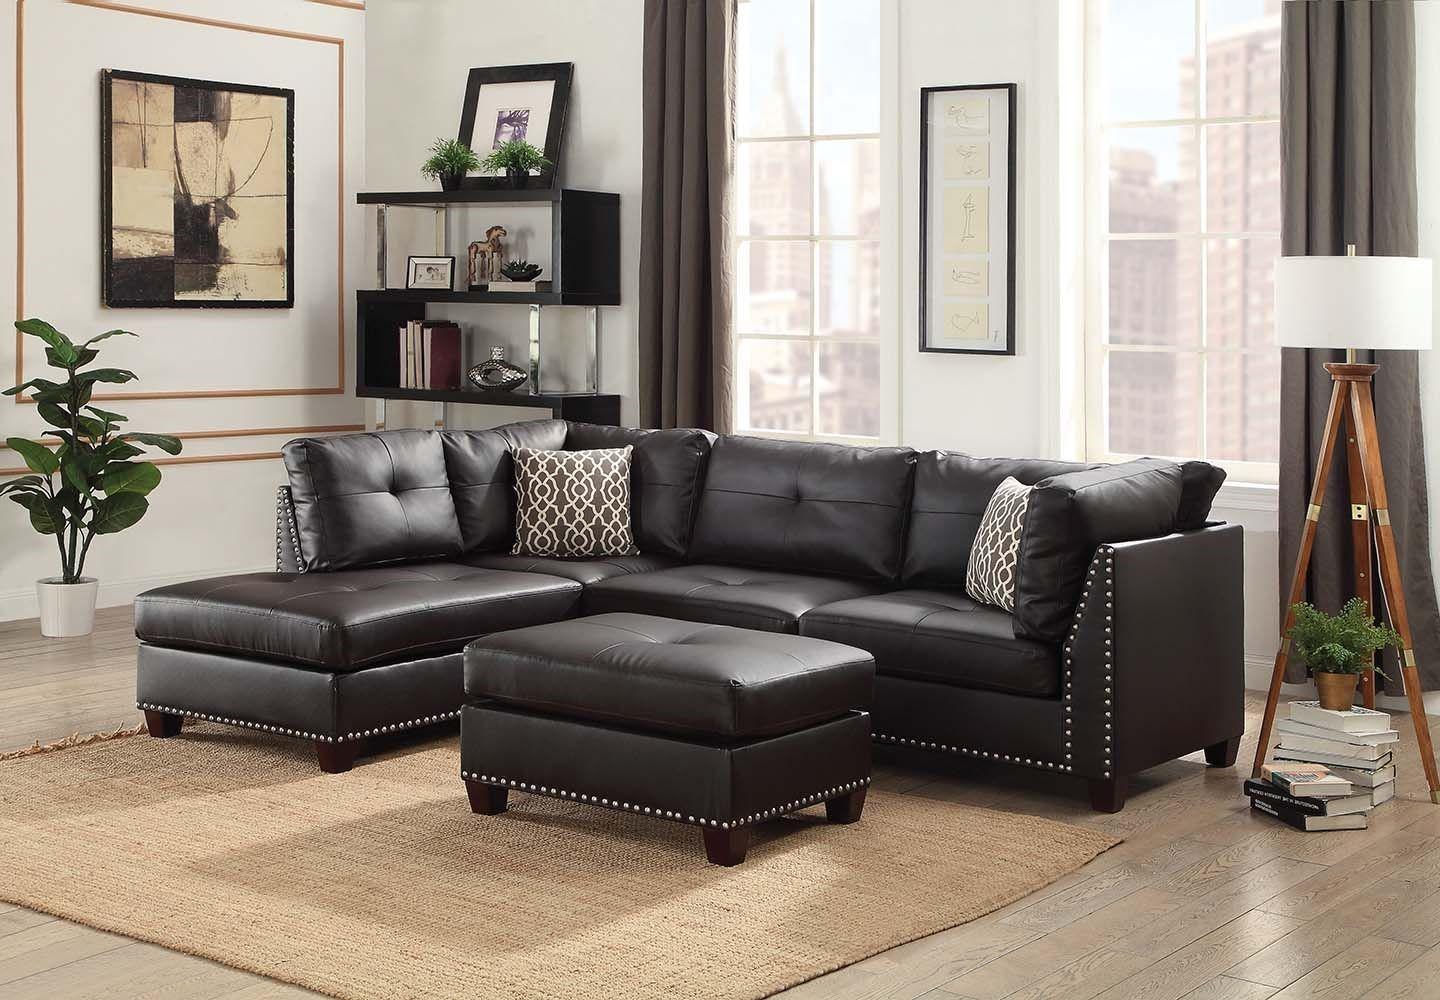 Contemporary, Classic, Simple Sectional Sofa and Ottoman Laurissa 54405-3pcs in Ebony PU